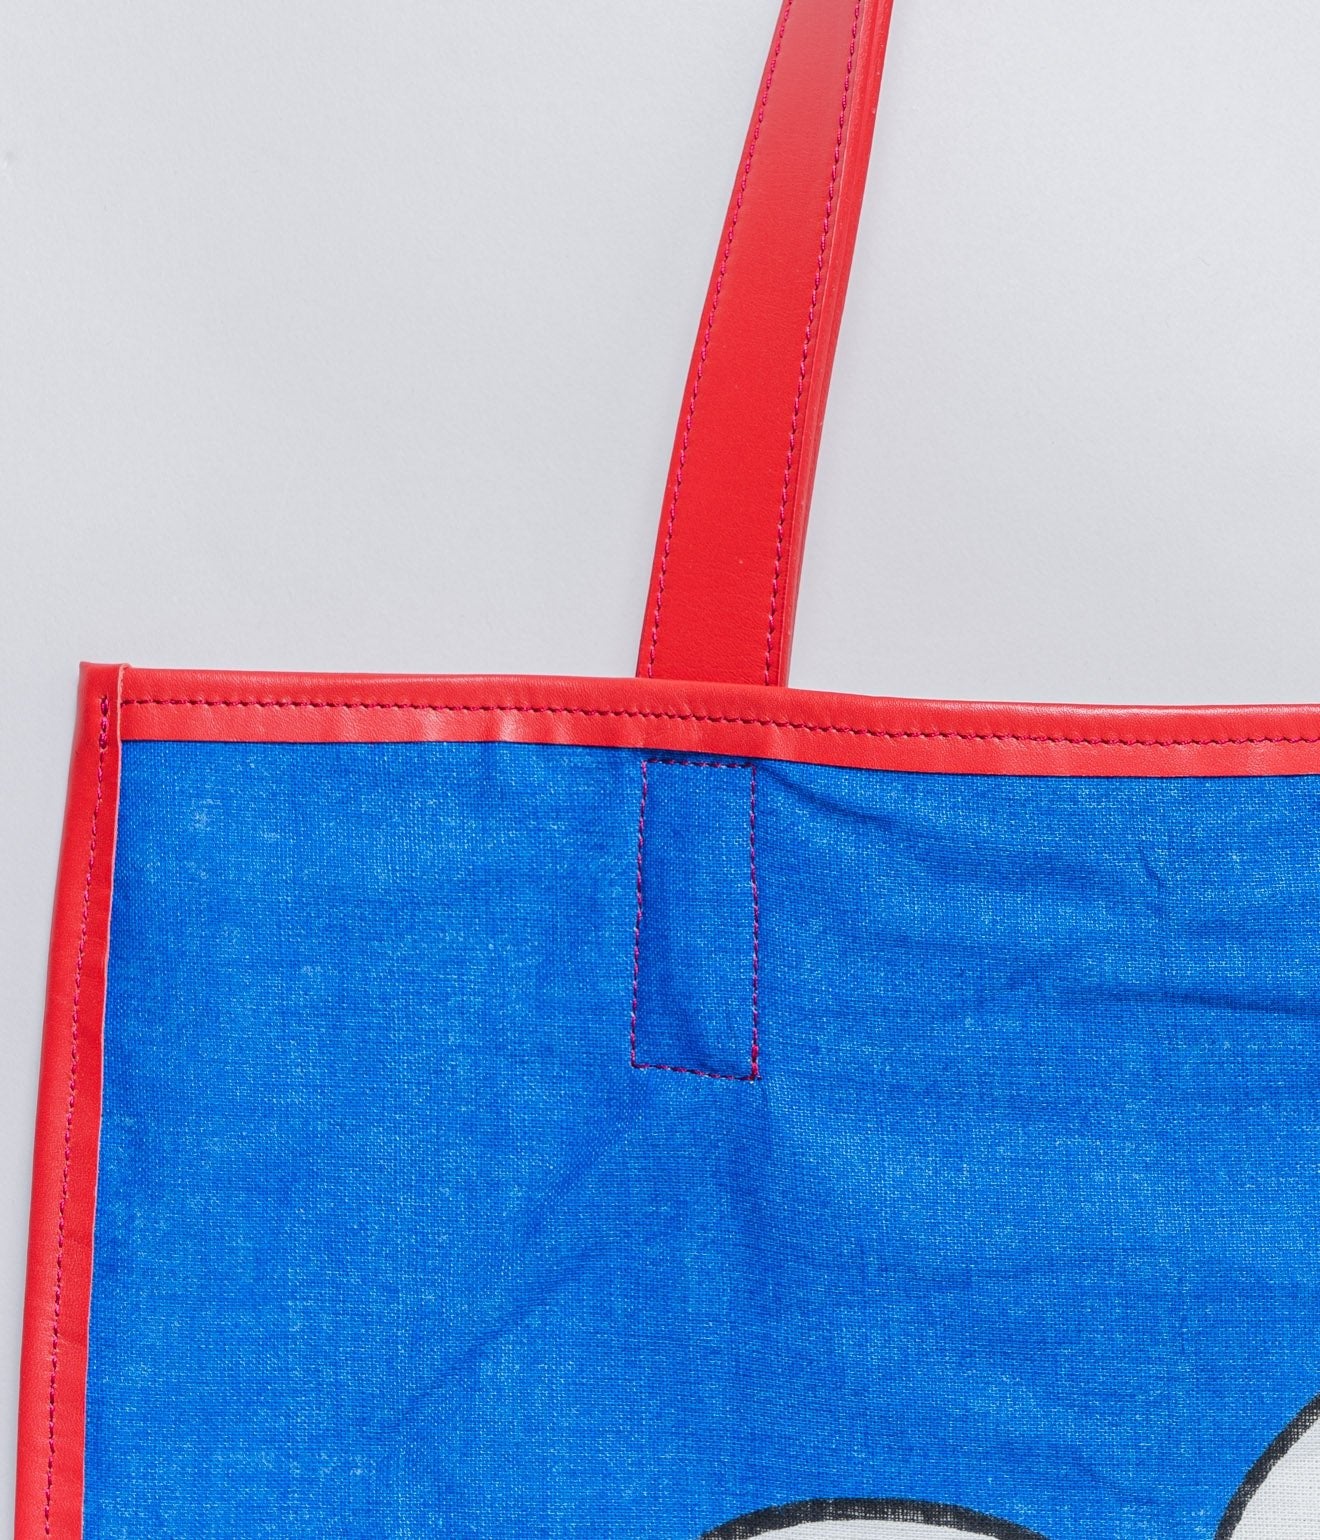 WEAREALLANIMALS UPCYCLE ”Piping Flat Tote -Vintage Smurf Fabric-" #8 - WEAREALLANIMALS